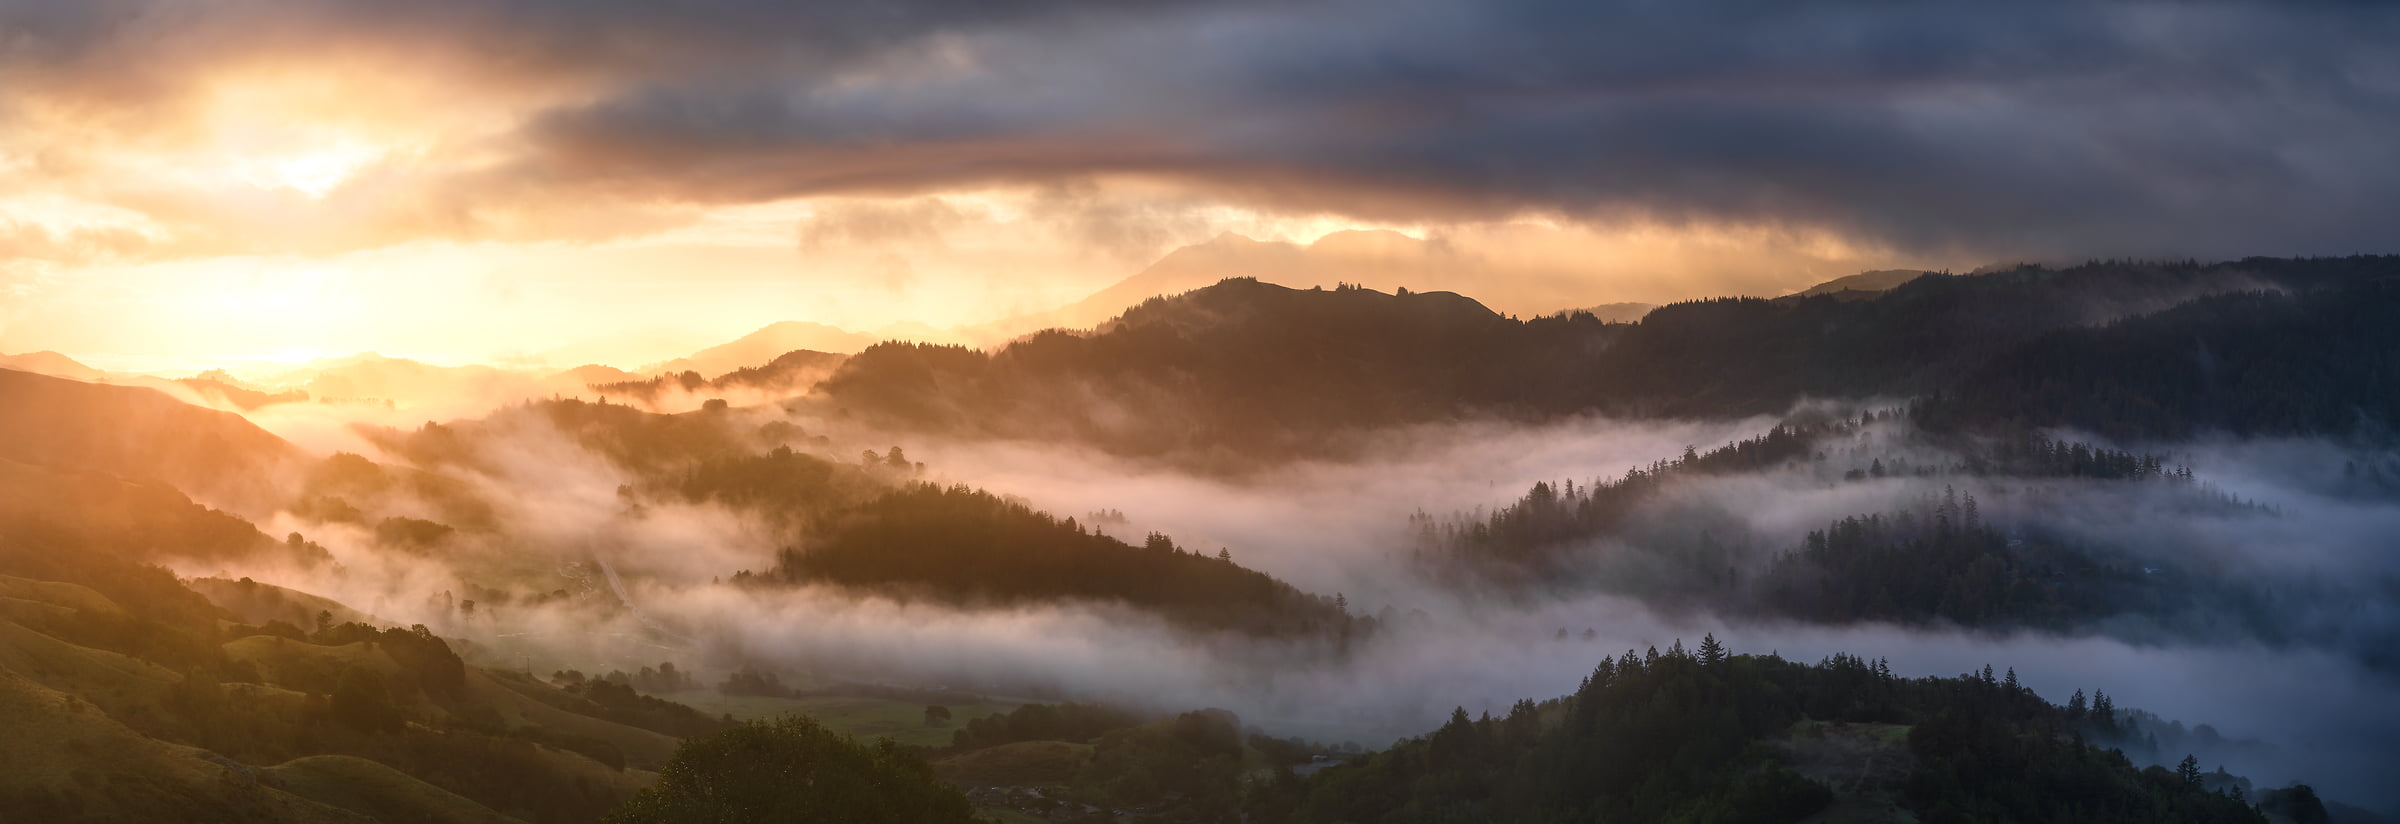 188 megapixels! A very high resolution, large-format VAST photo print of an inspirational sunrise with hills, fog, and clouds; landscape photograph created by Jeff Lewis in Marin County, California.